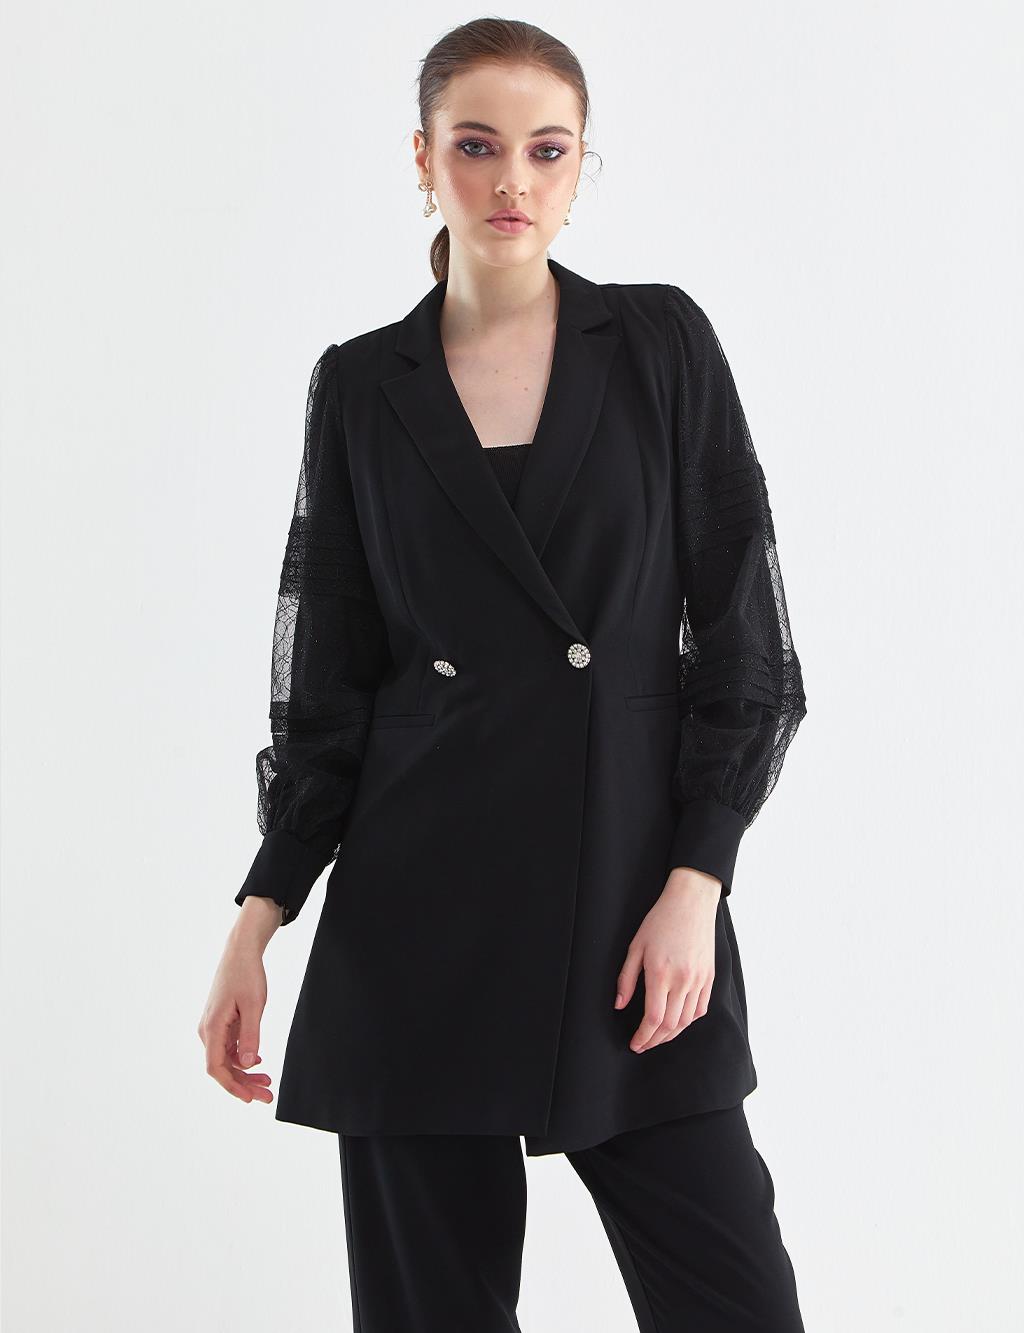 Tulle Coated Suit Black